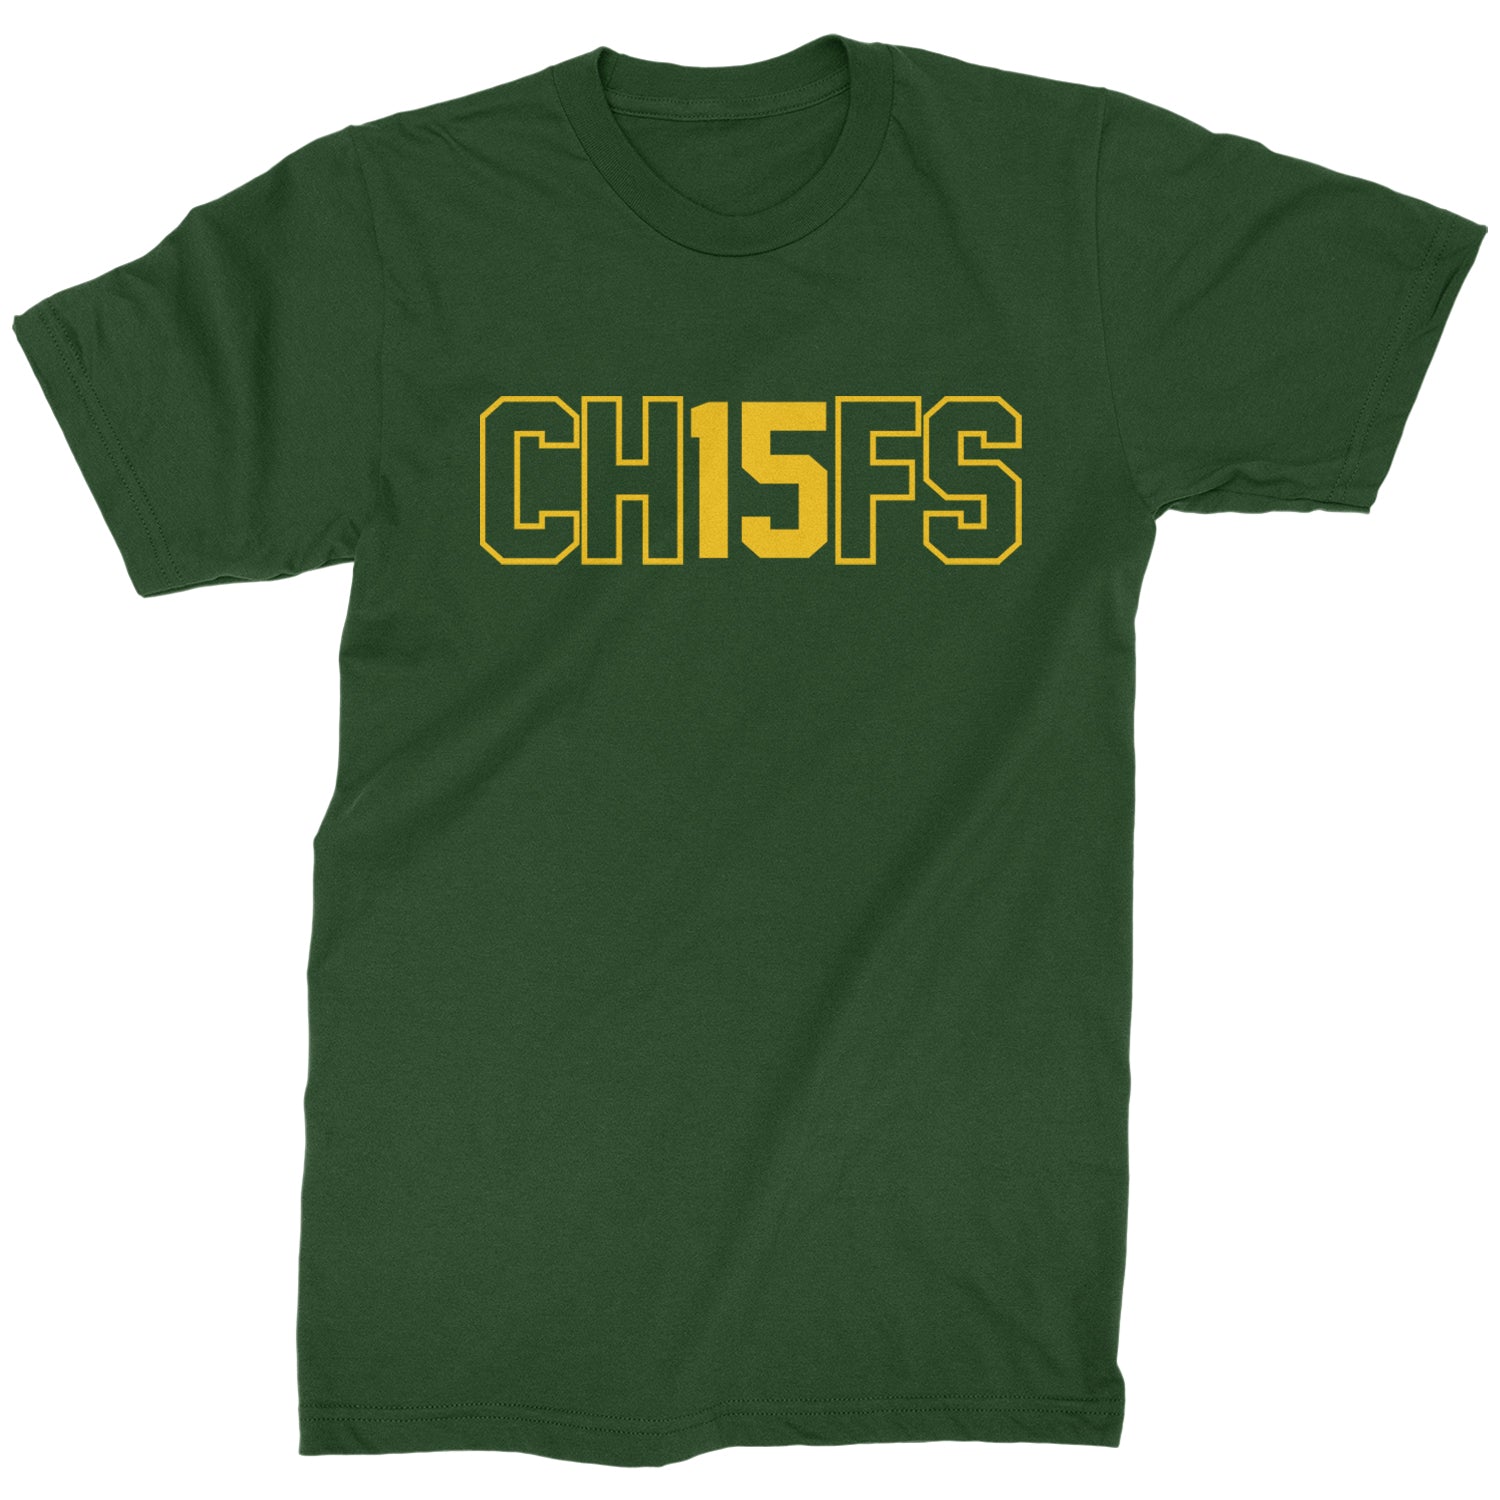 Ch15fs Chief 15 Shirt Mens T-shirt ass, big, burrowhead, game, kelce, know, moutha, my, nd, patrick, role, shut, sports, your by Expression Tees